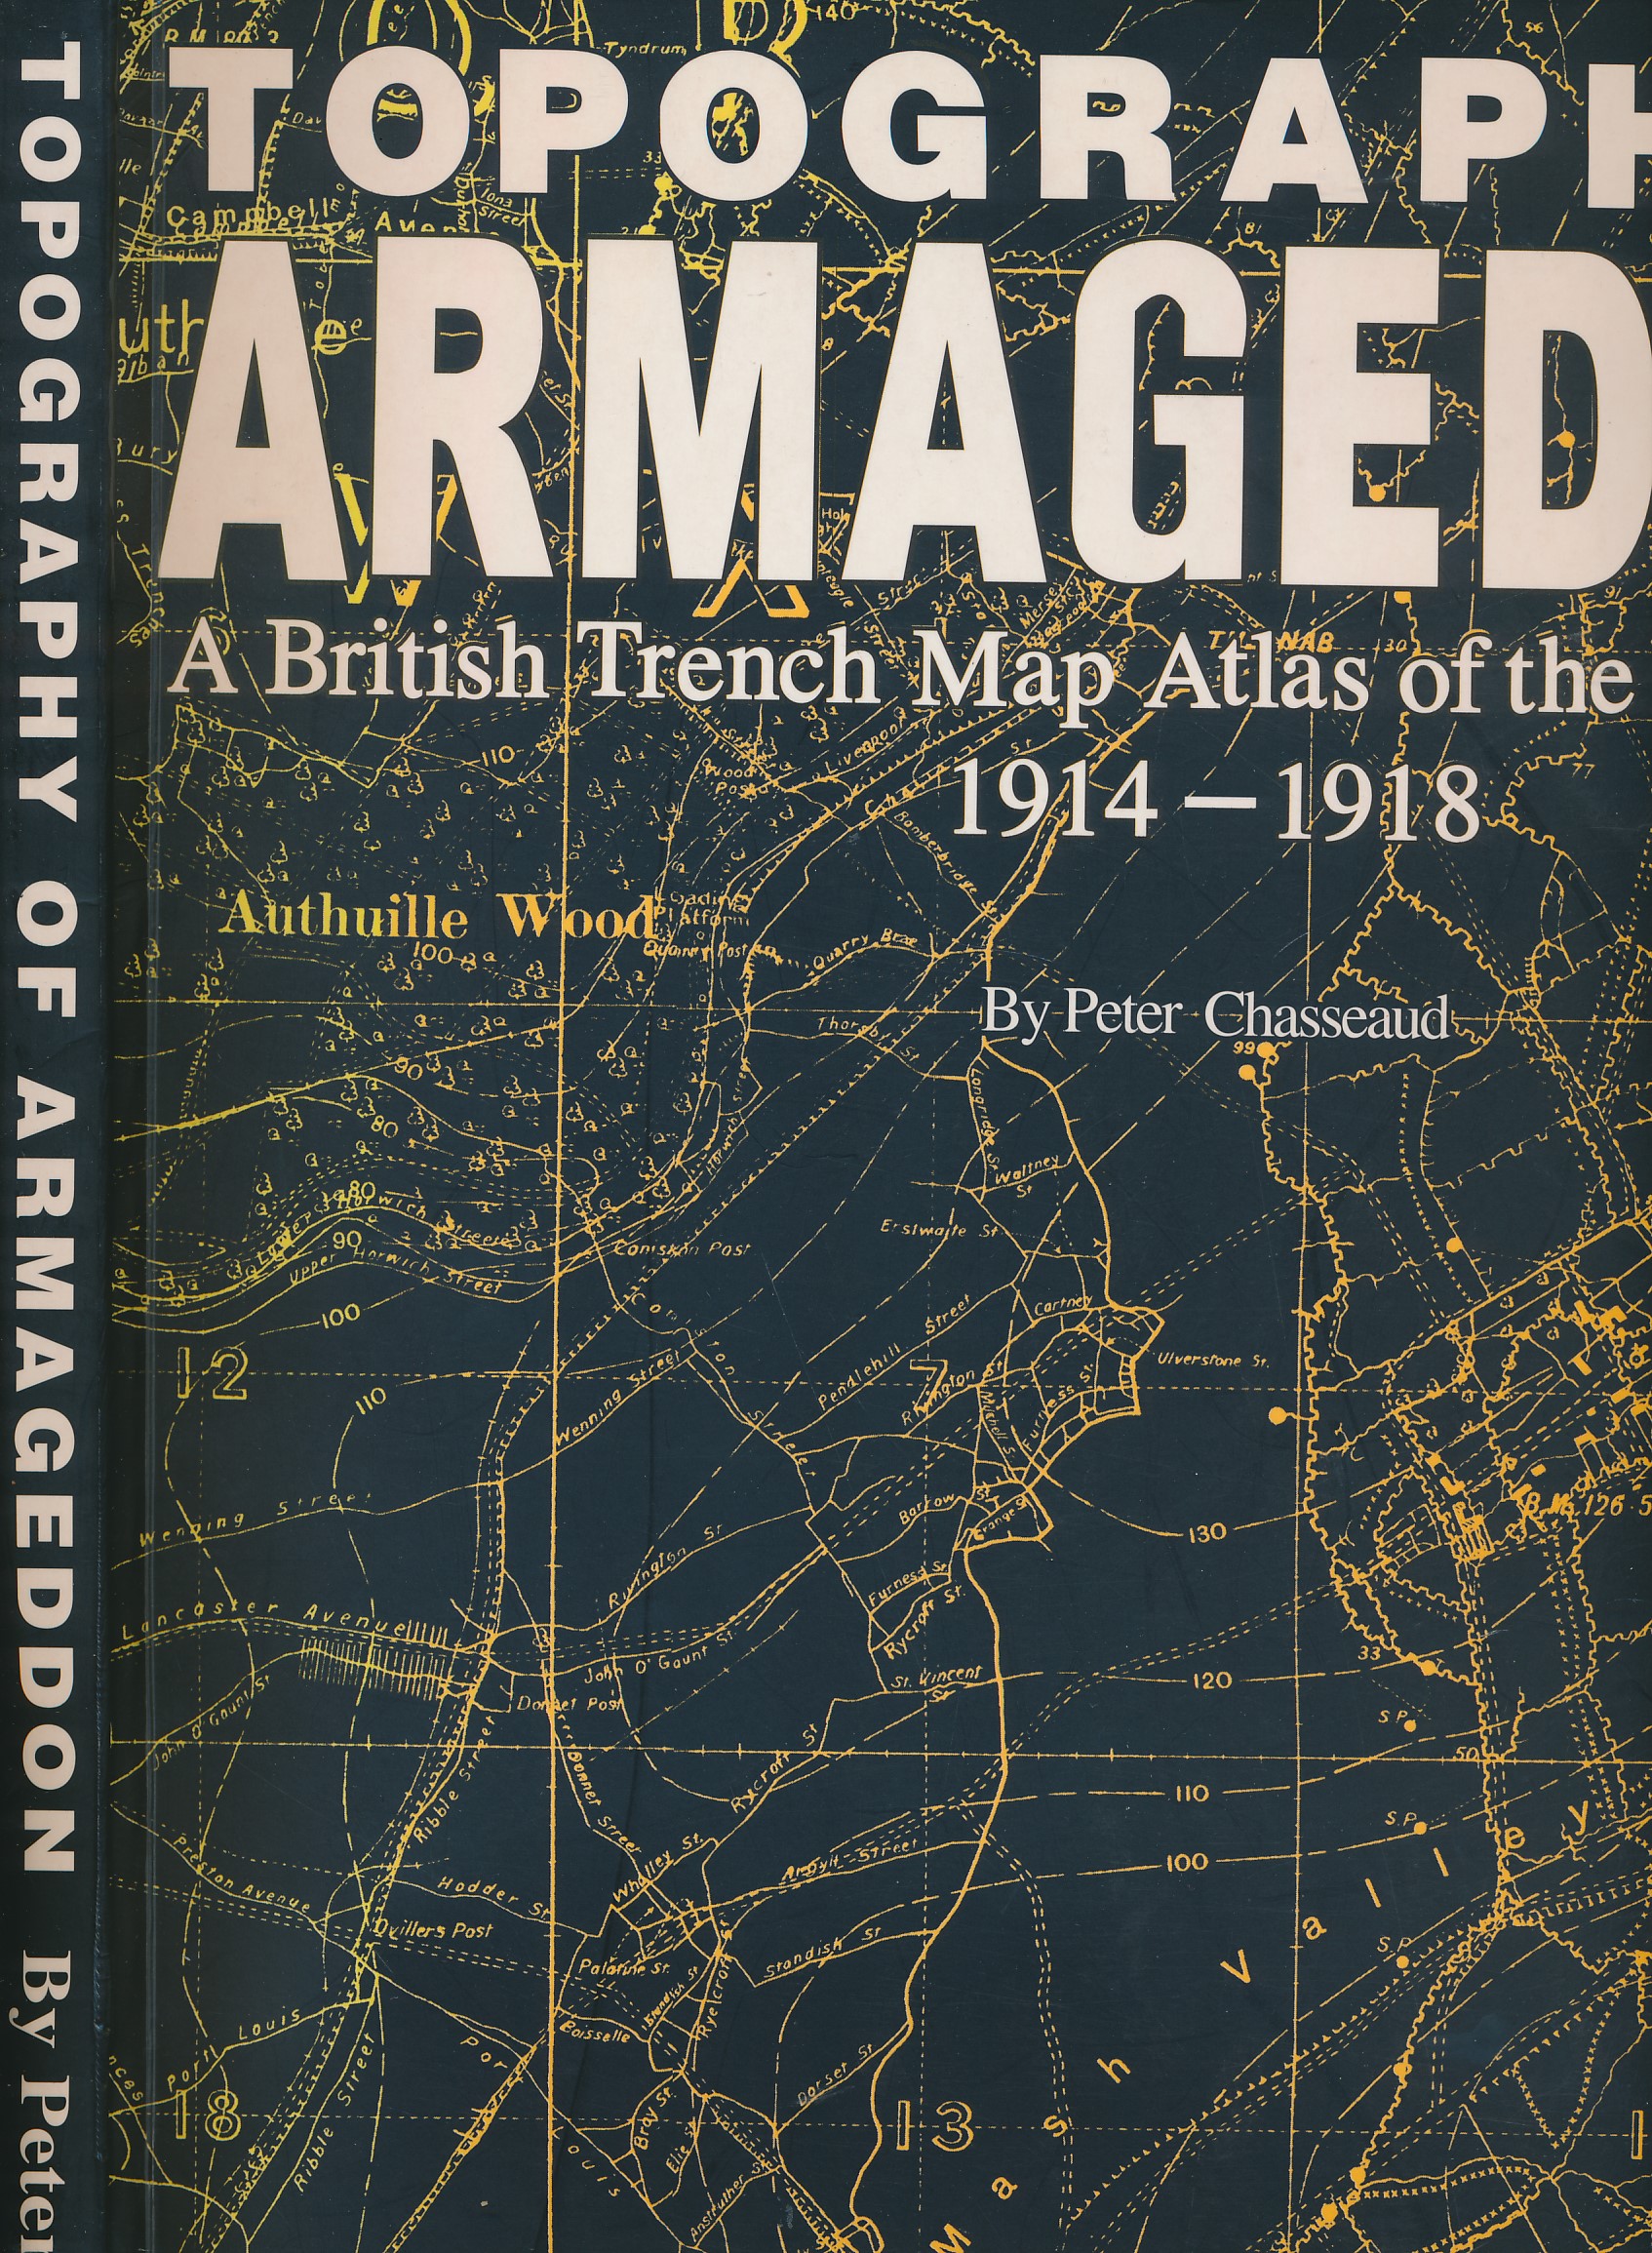 Topography of Armageddon. A British Trench Map Atlas of the Western Front 1914 - 1918